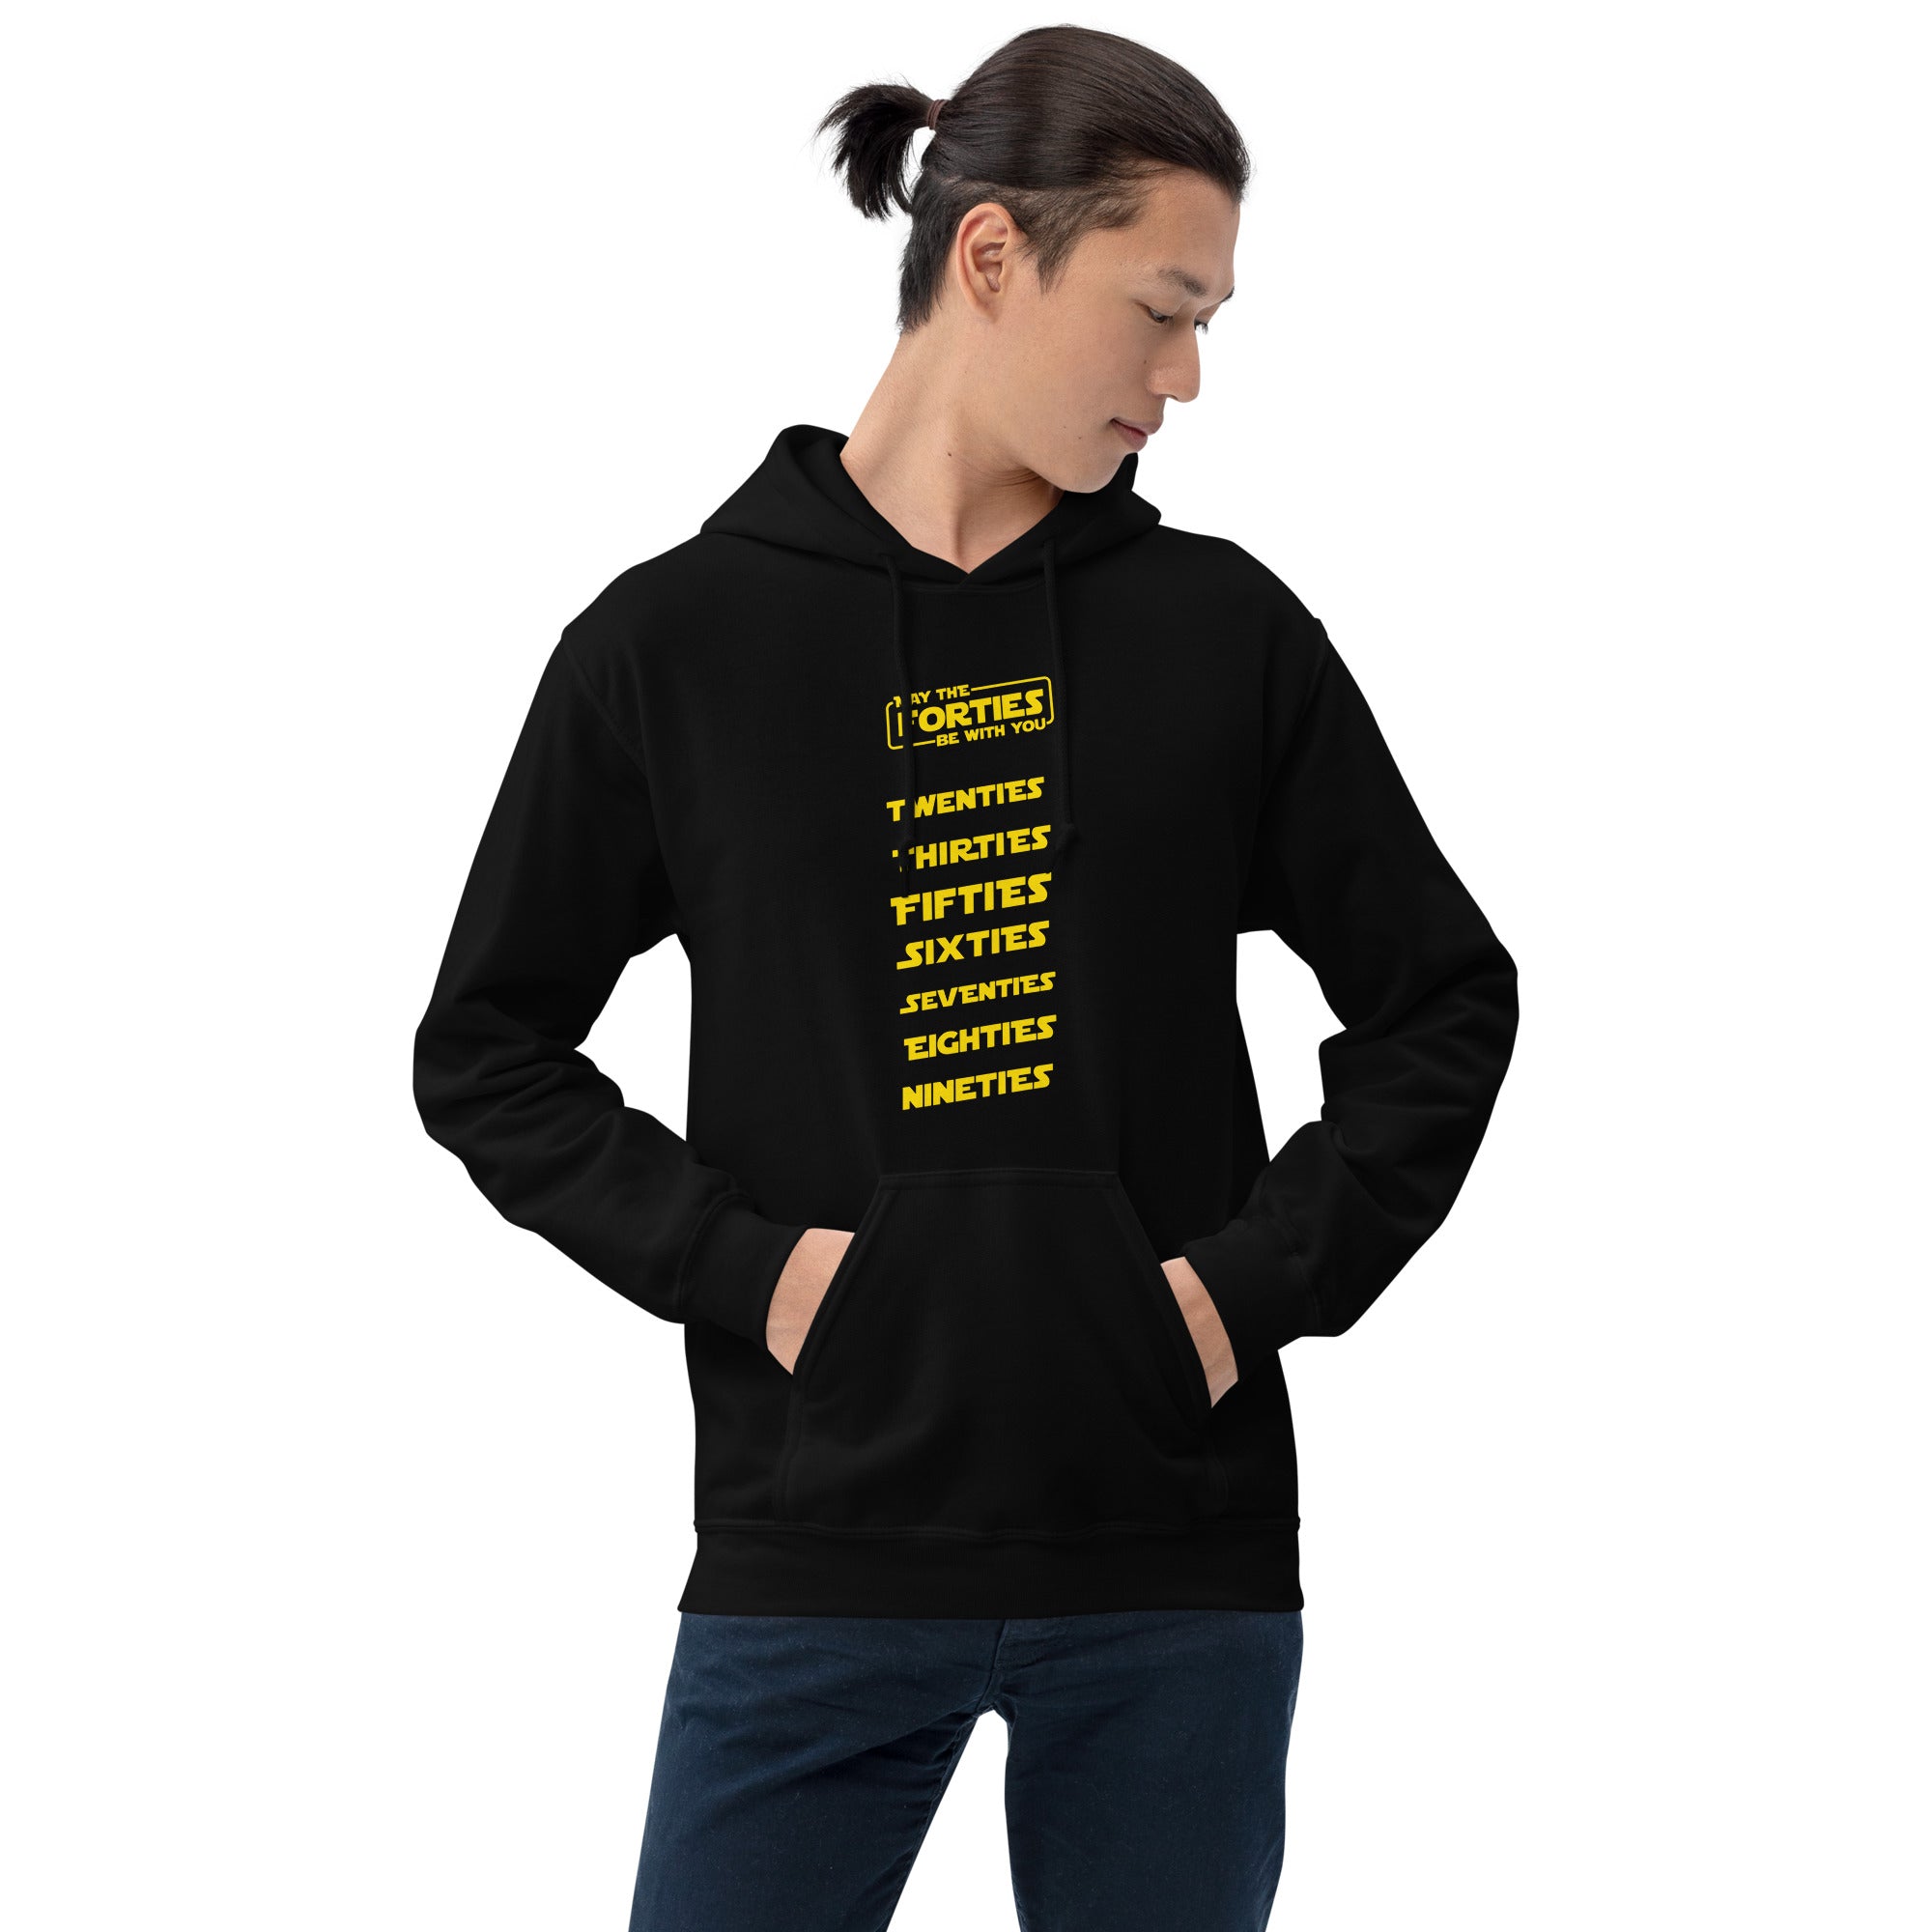 May The Forties Be With You - Unisex Hoodie